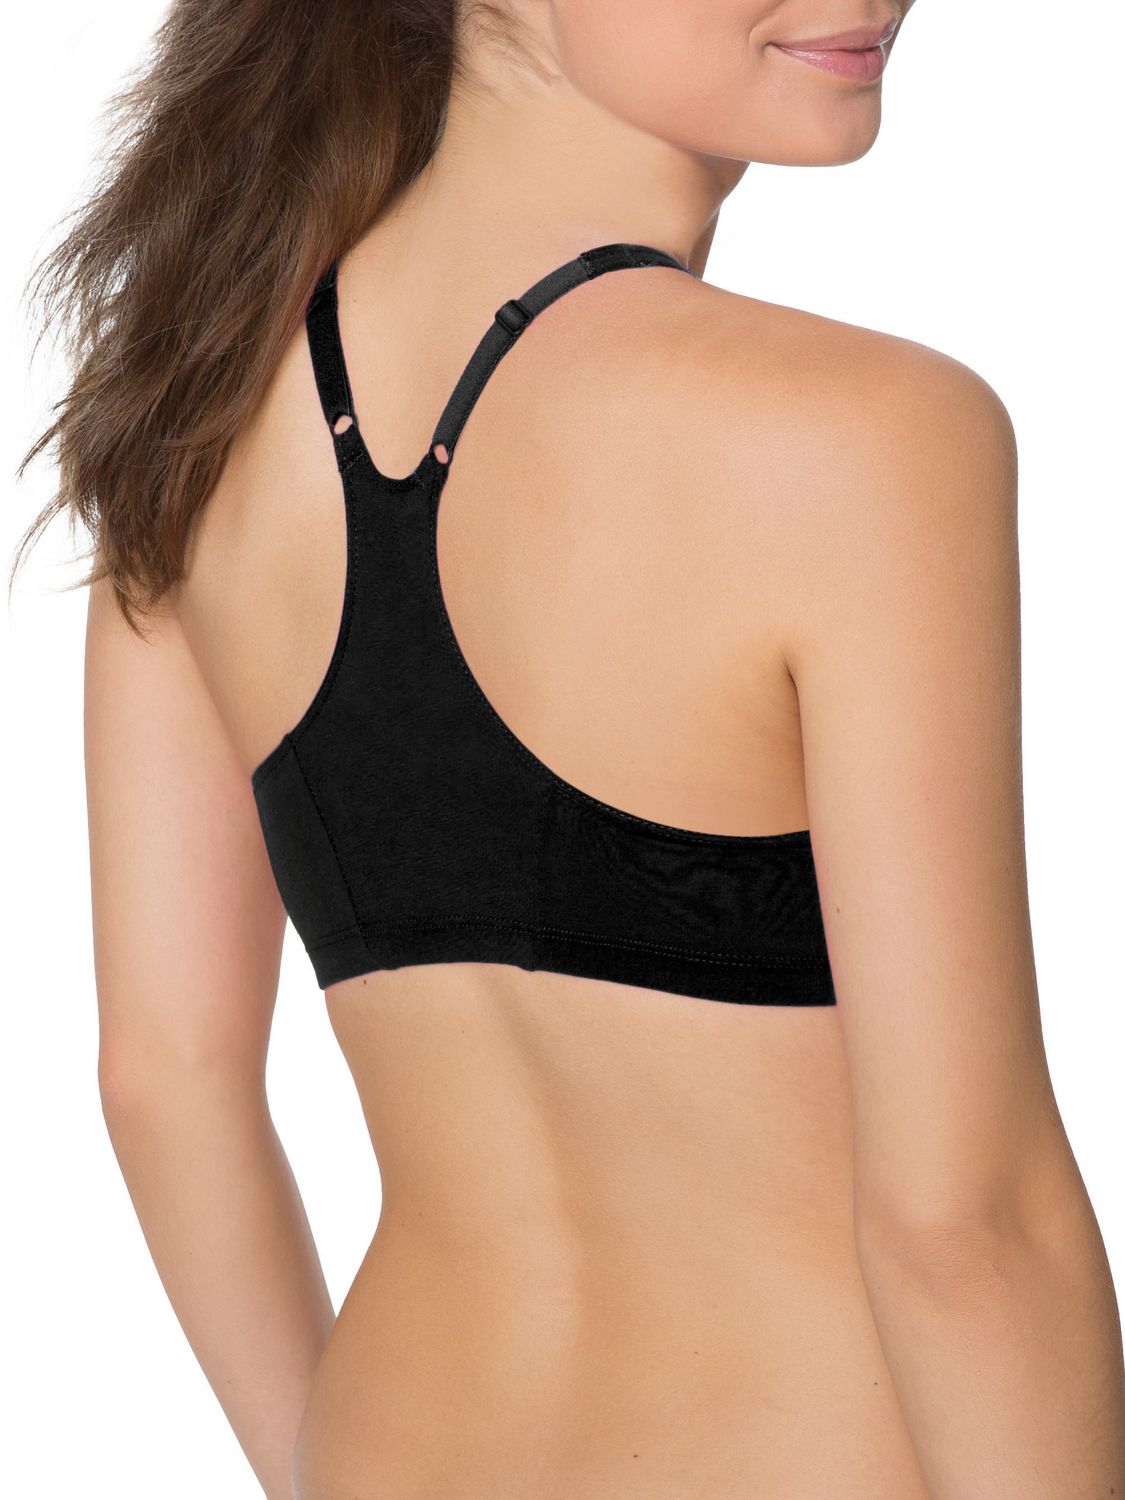 2-Pack Fruit of the Loom Women's Front Close Builtup Sports Bra Sand/Black  (Various sizes) $7.19 + Free Shipping w/ Prime or on $35+